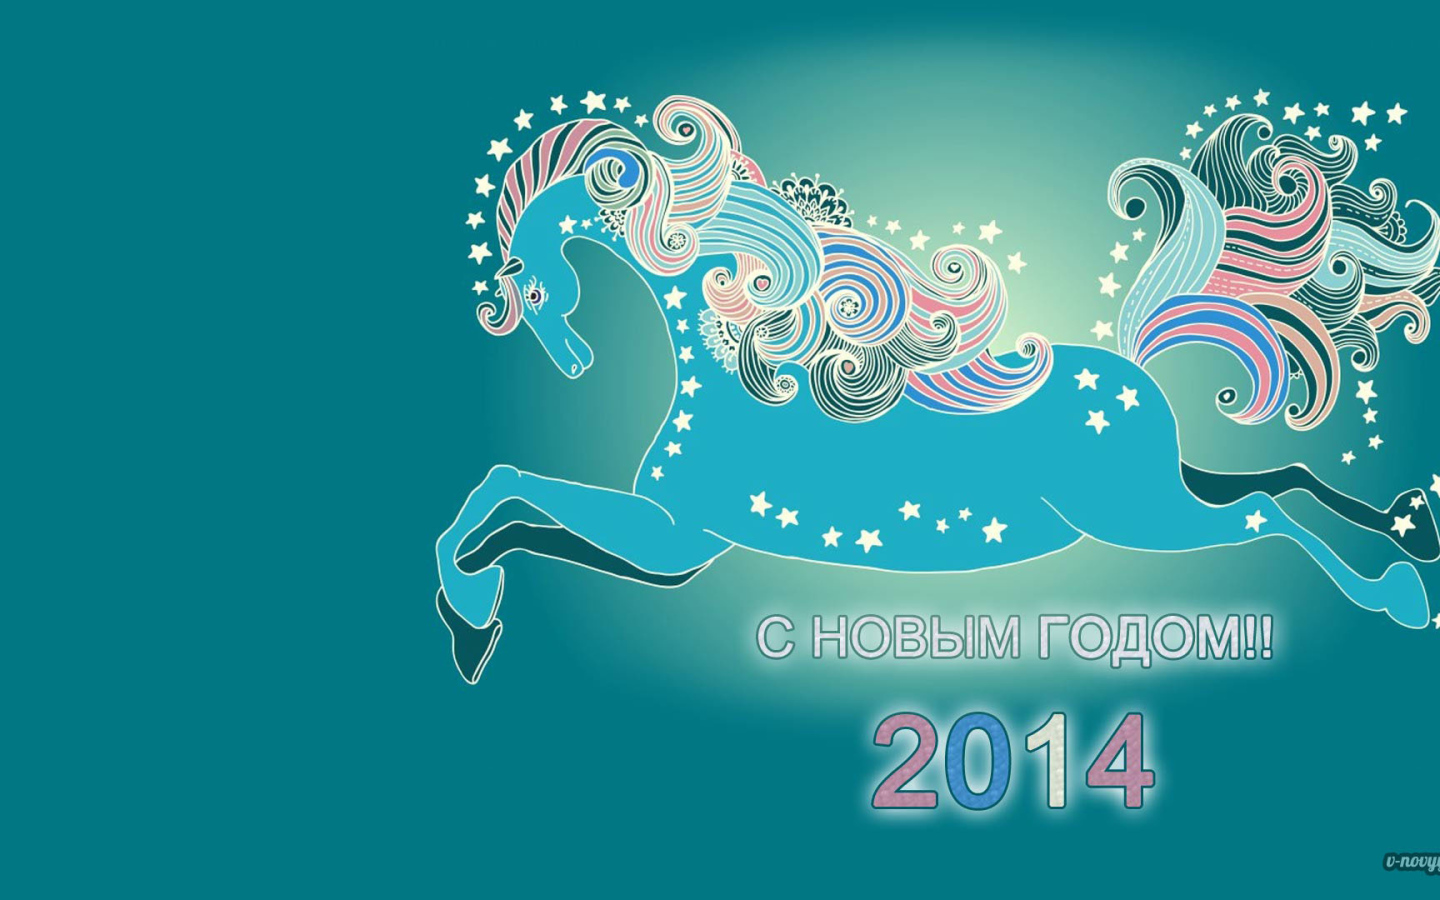 New 2014 Year of the Horse Blue background